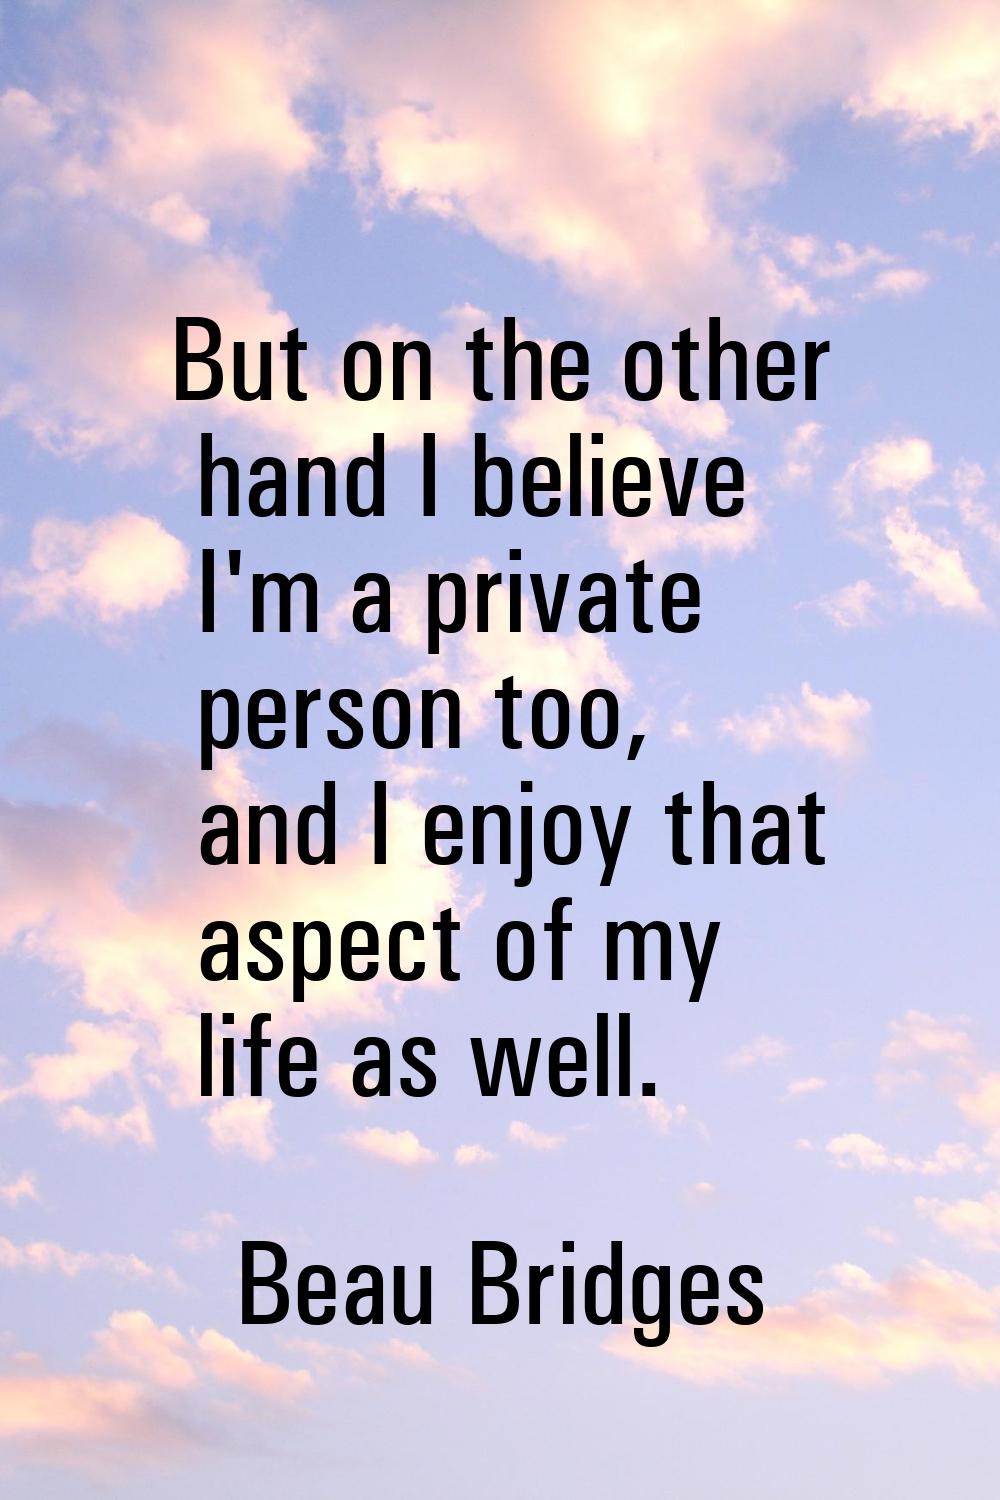 But on the other hand I believe I'm a private person too, and I enjoy that aspect of my life as wel